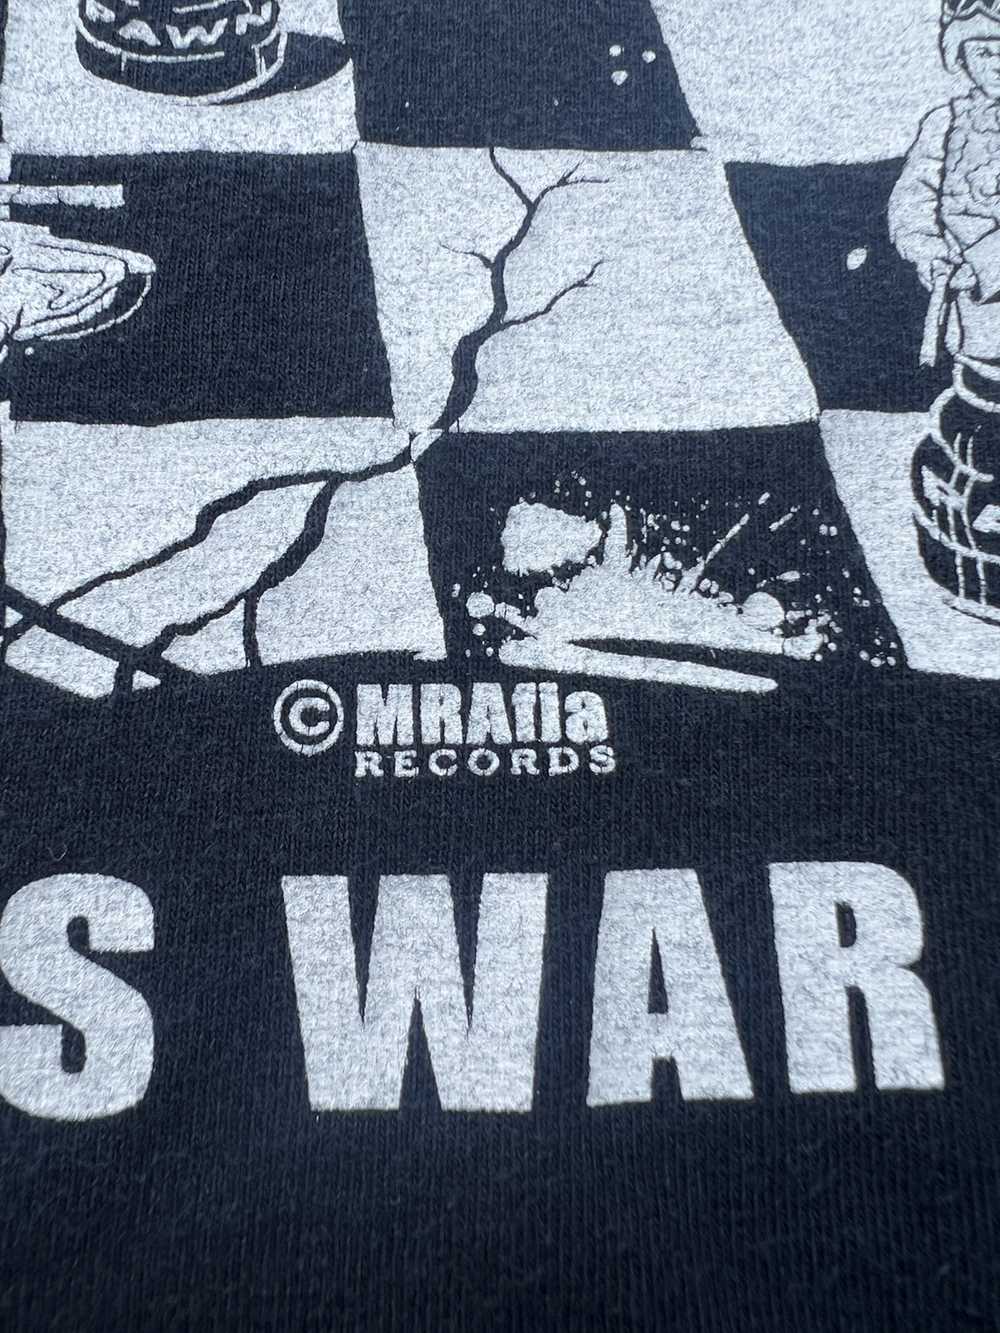 Band Tees × Vintage Vintage Mafia Records This is… - image 3